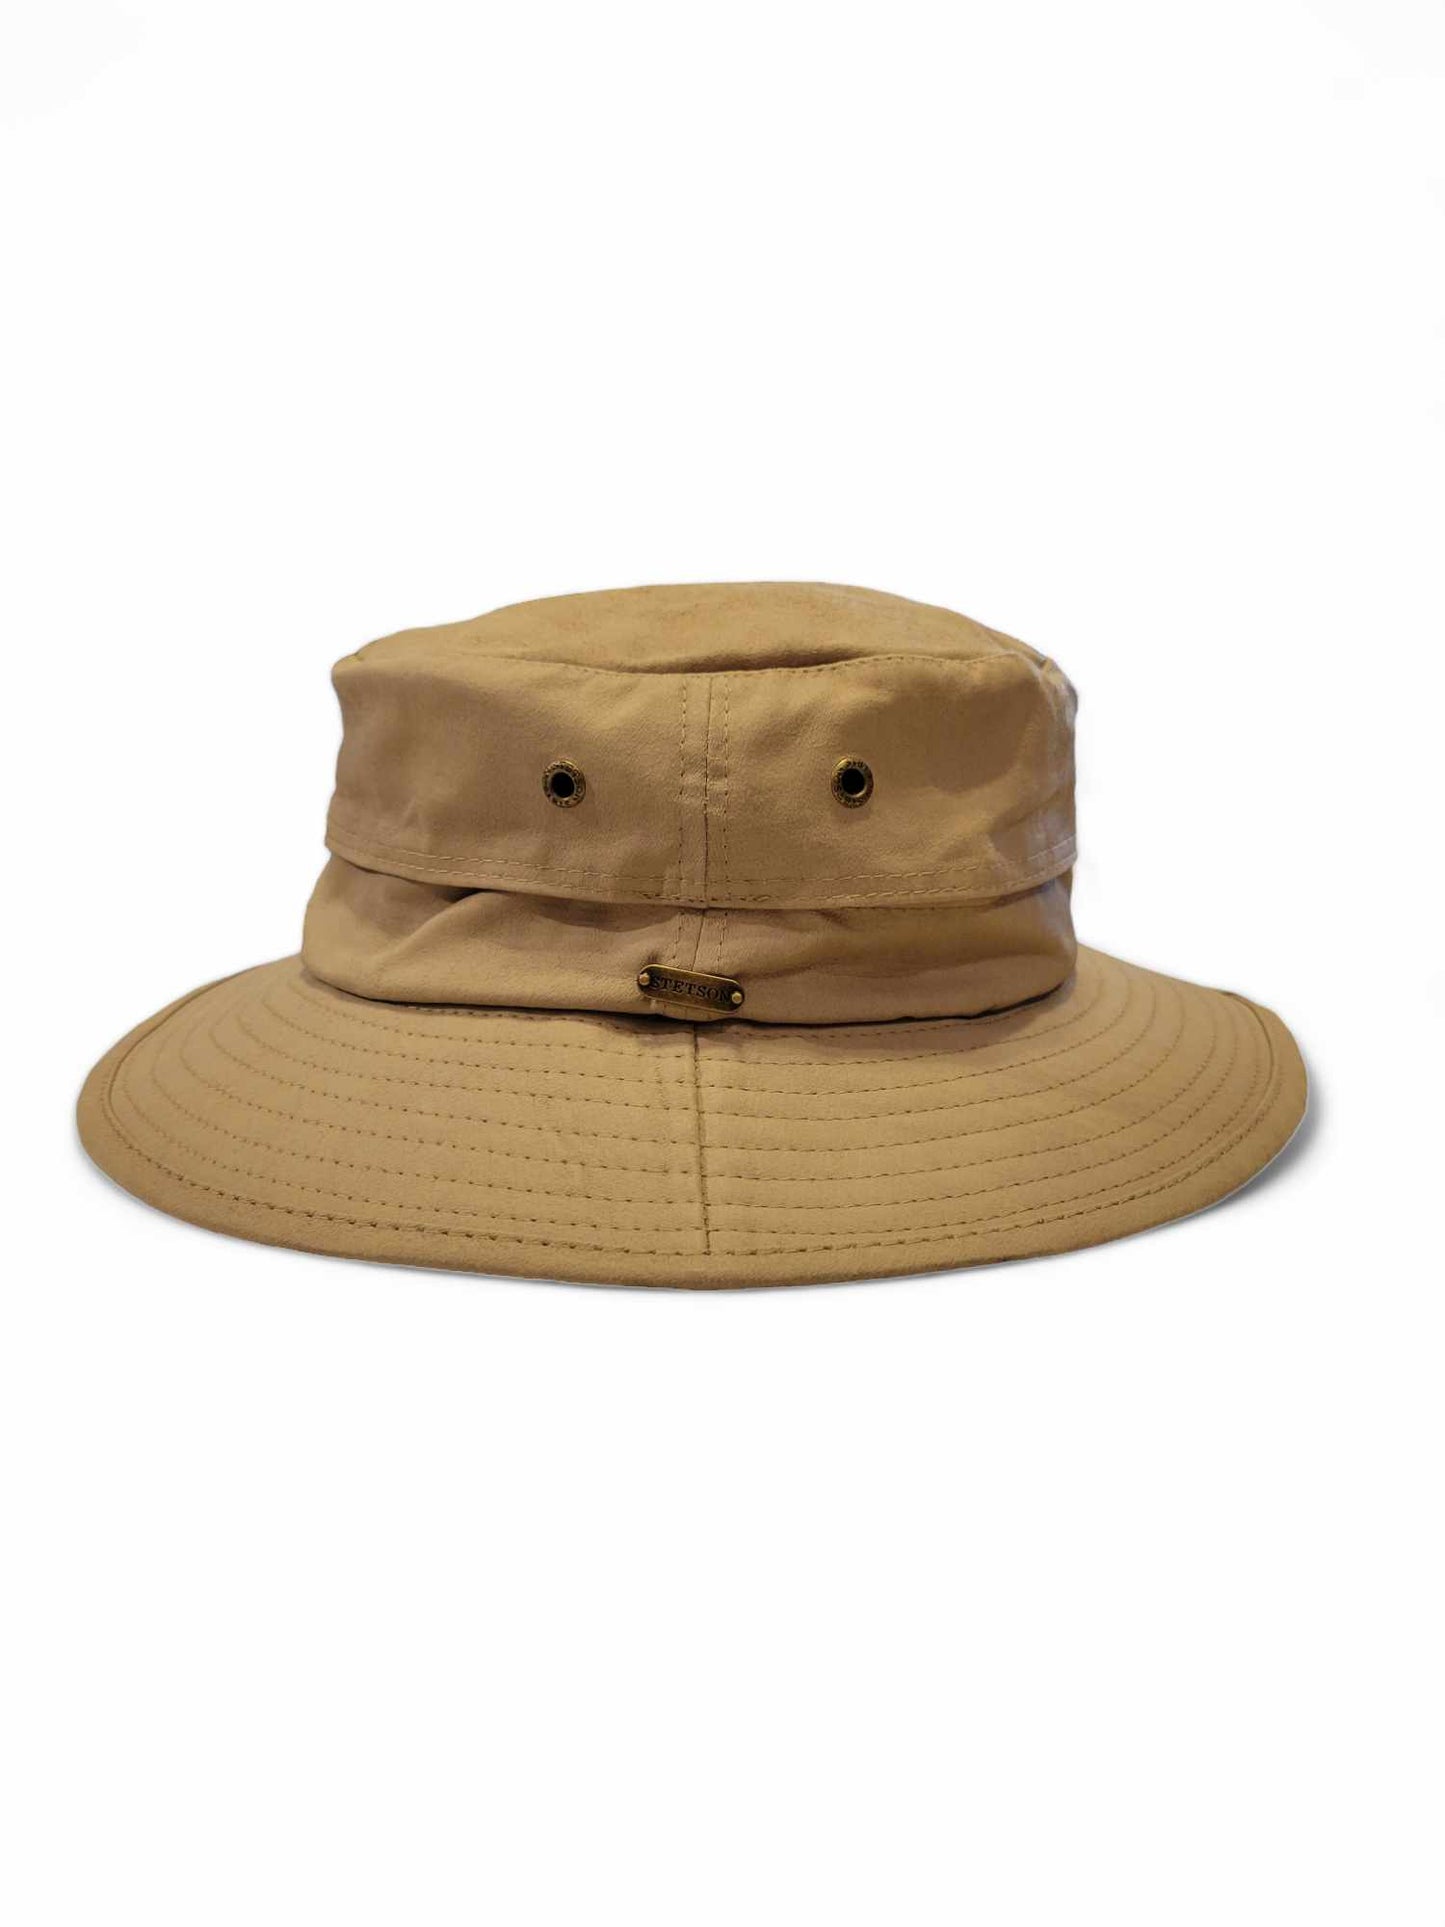 Stetson Ventilated Outdoor Cloth Hat